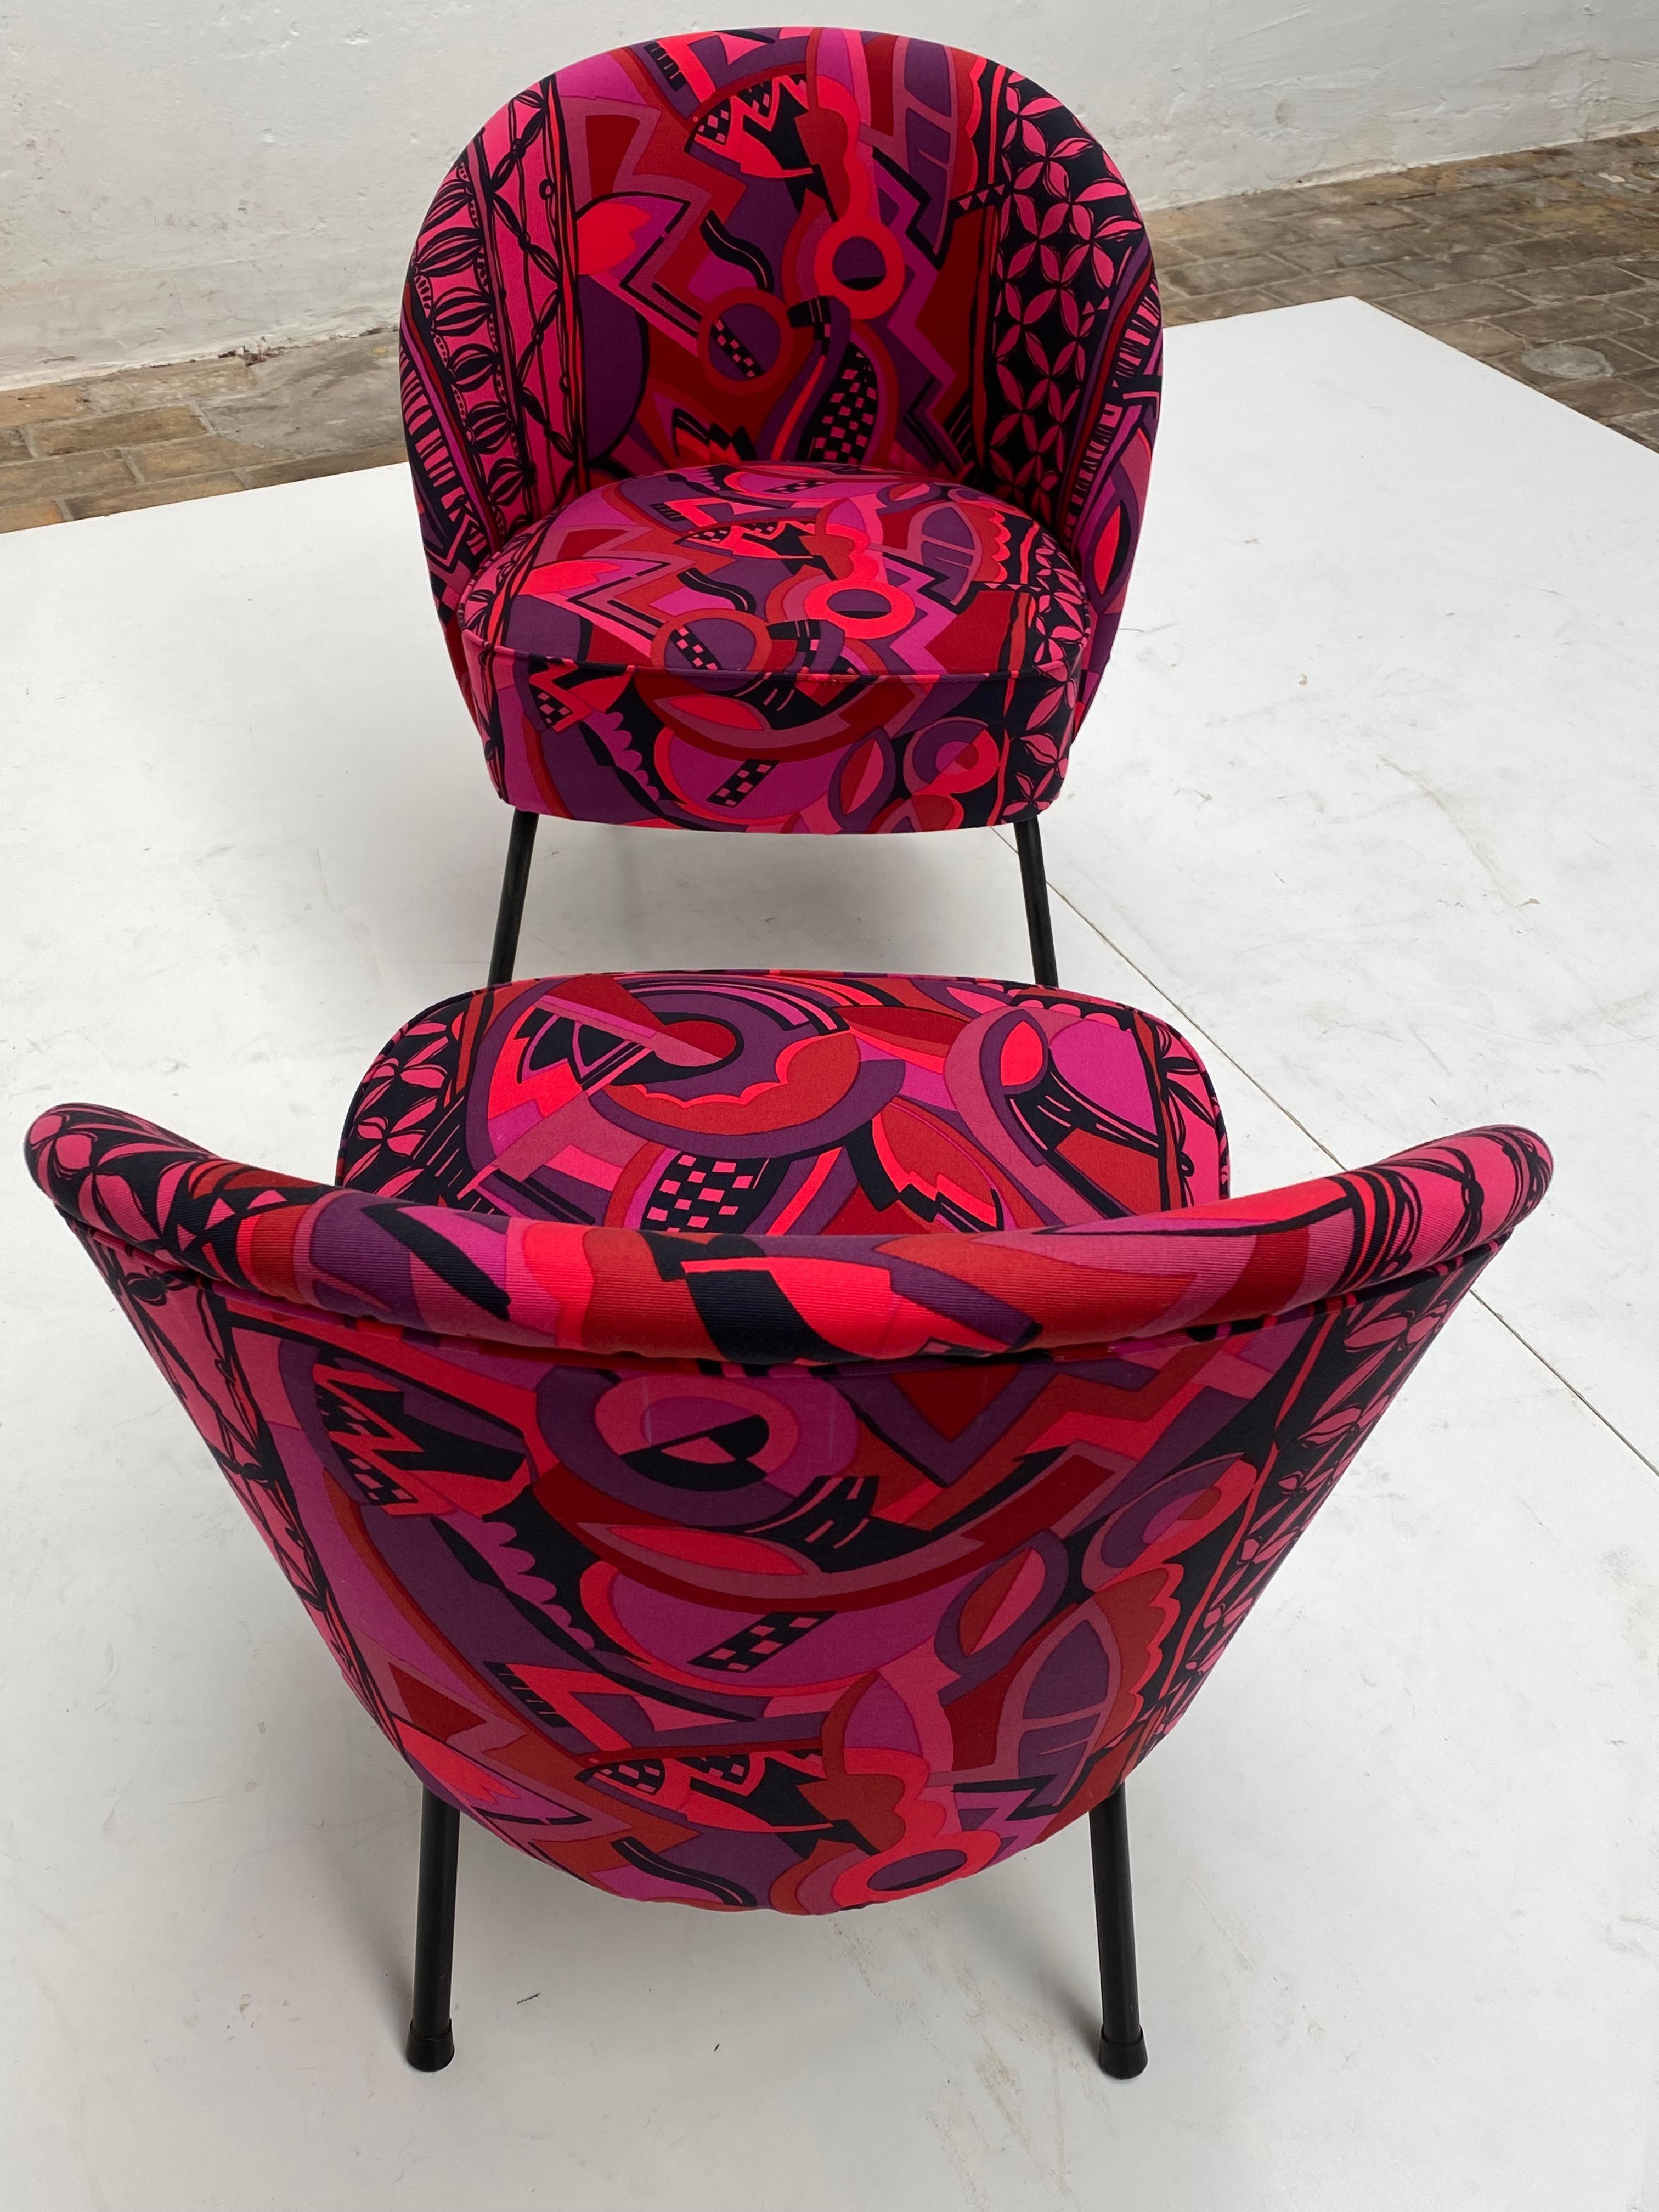 Metal Bespoke Gianni Versace Fabric Custom Upholstered Pair of 1950's Cocktail Chairs For Sale